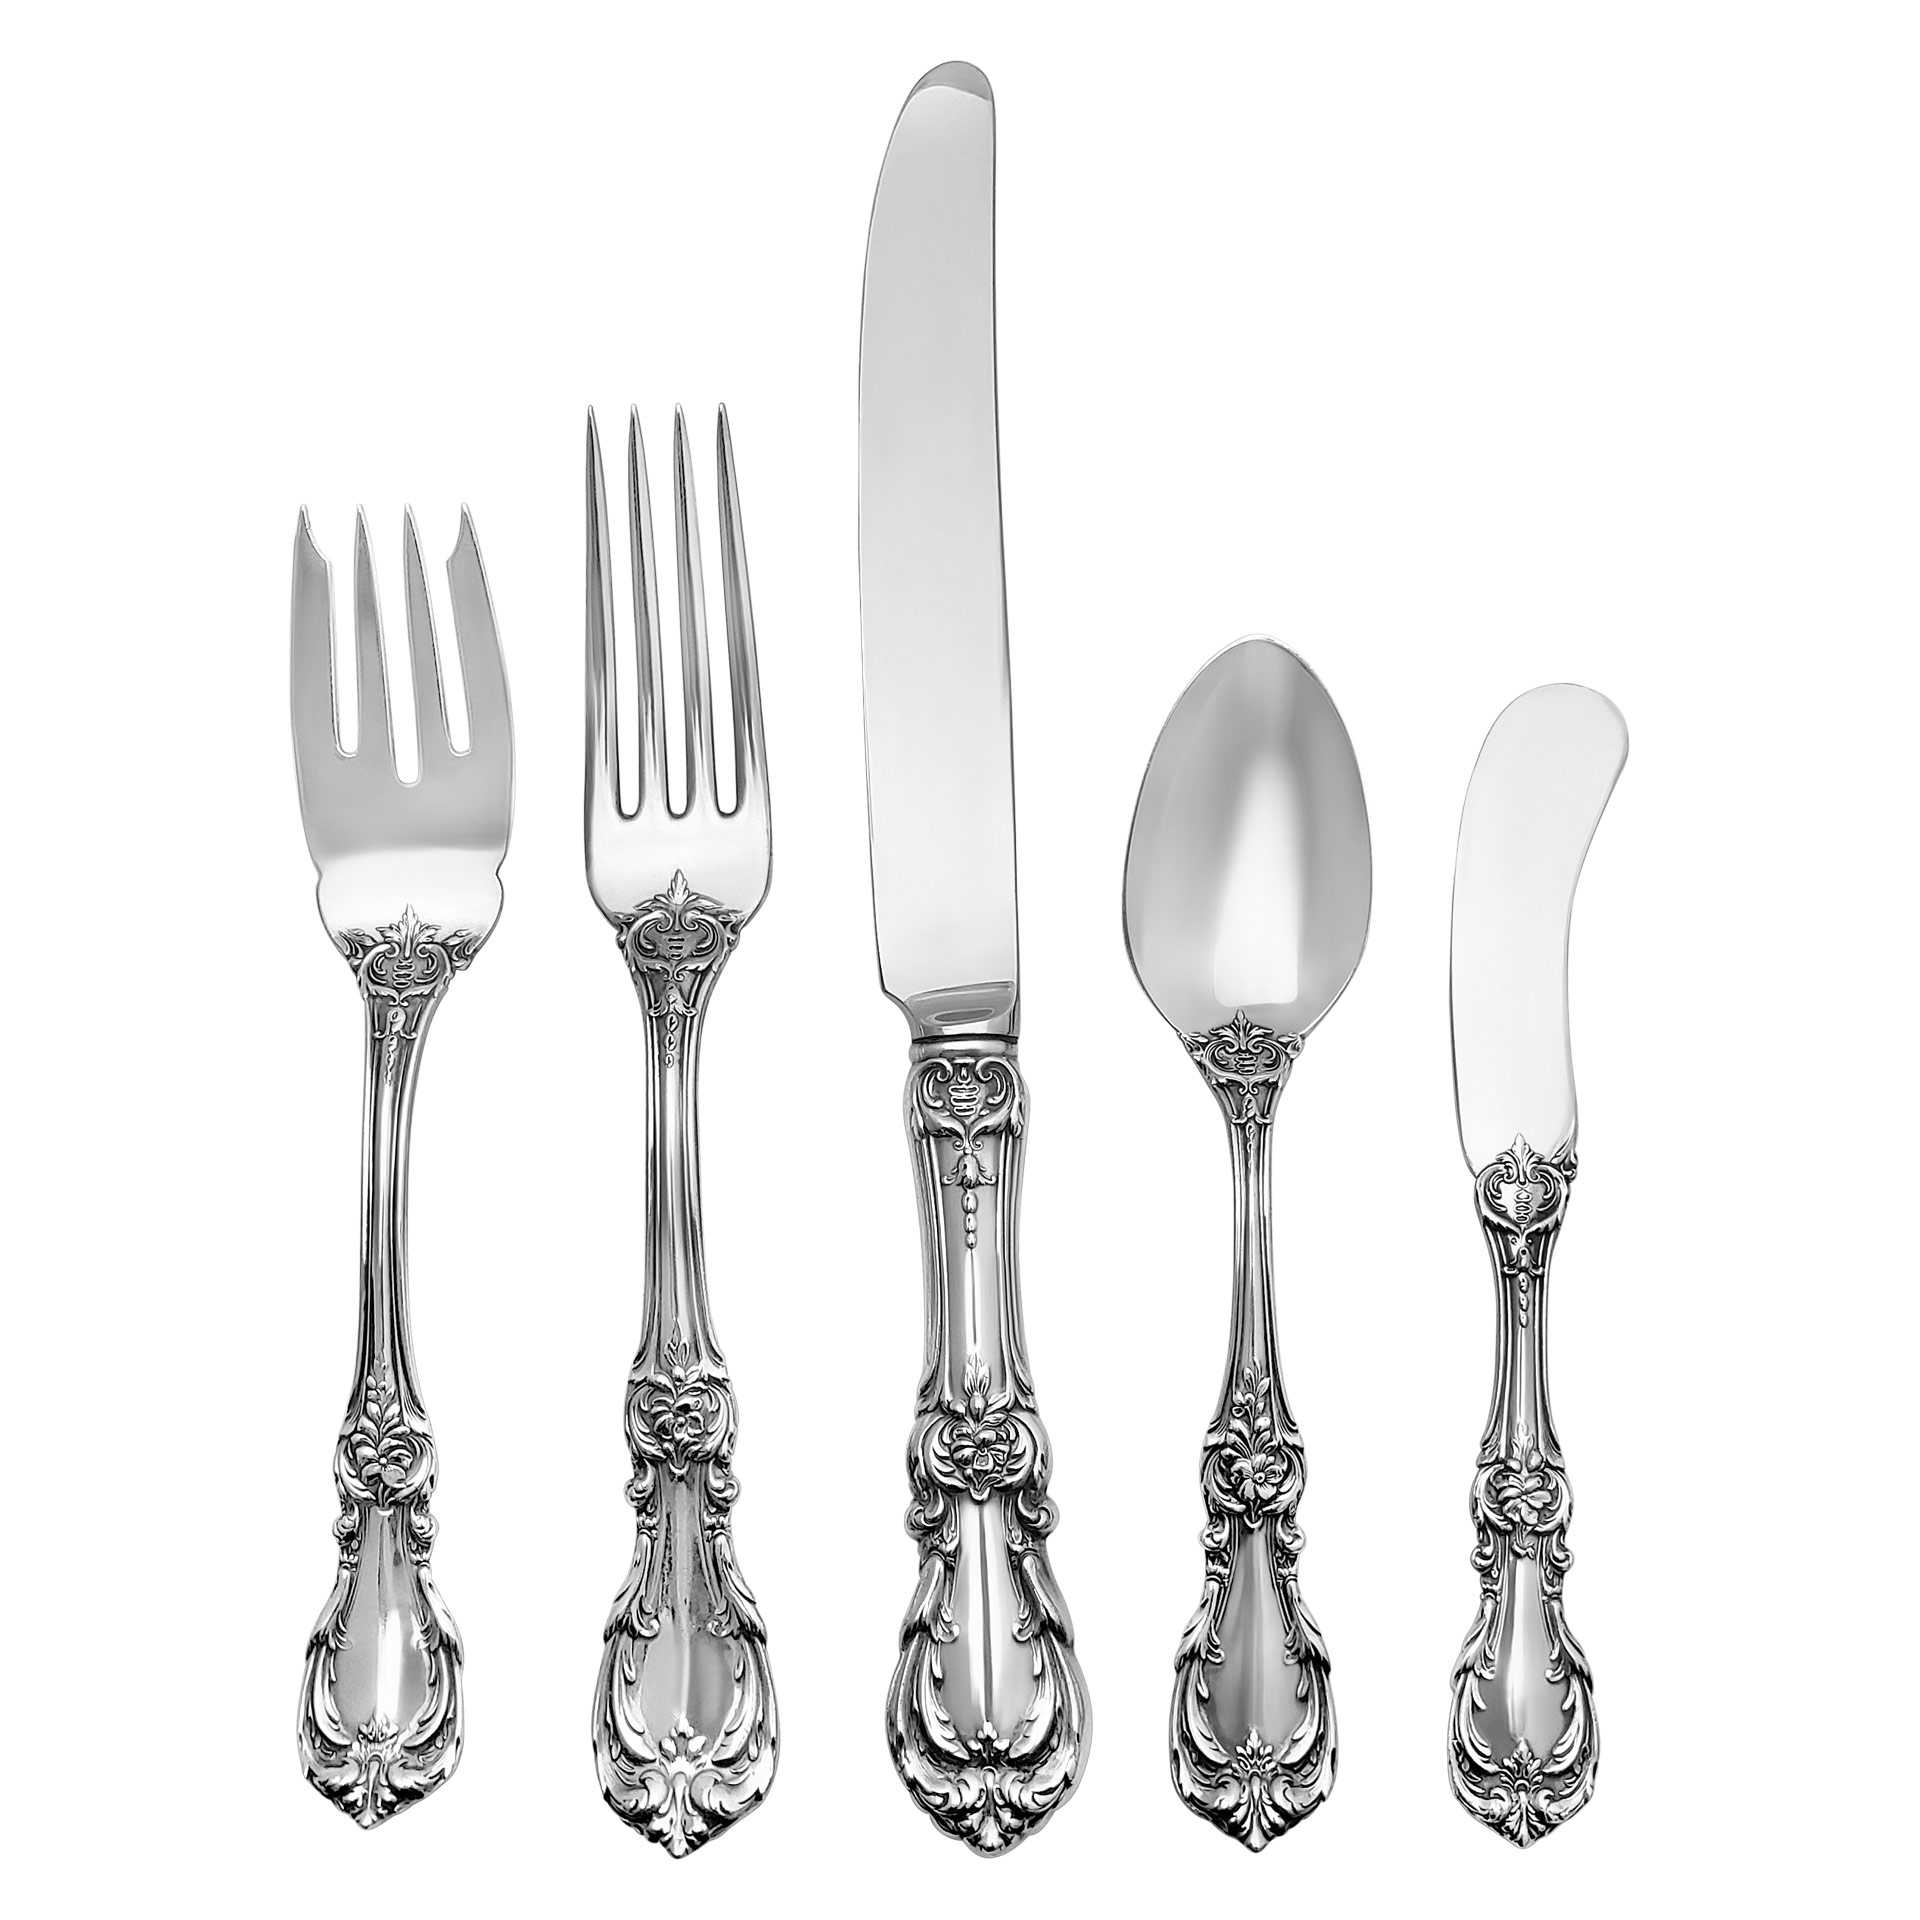 "BURGUNDY" sterling silver flatware set, ptd in 1949 by Reed & Barton- 95 pieces total- image 1